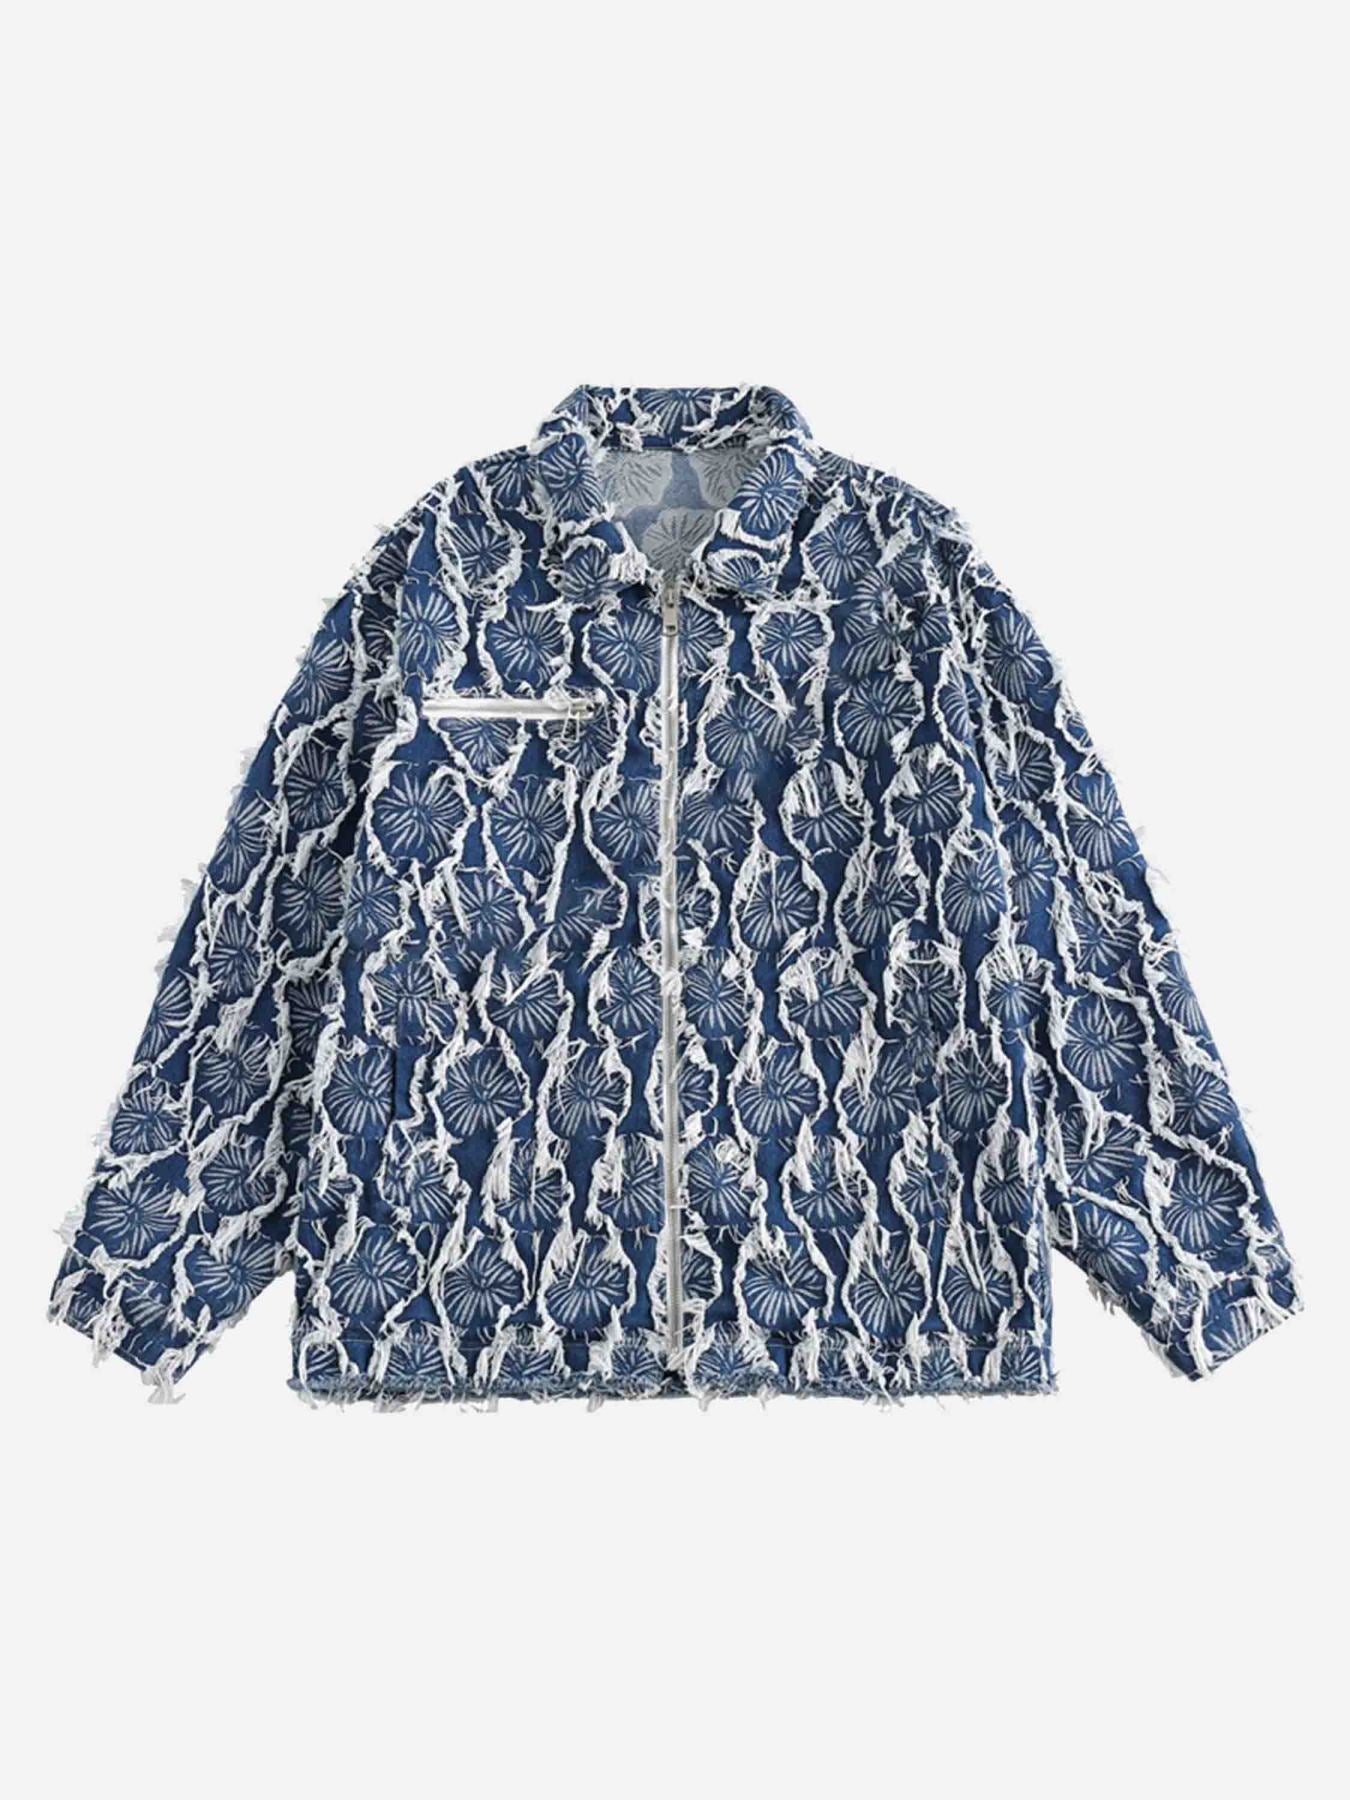 Thesupermade Tassel Embroidery Men's Jacket